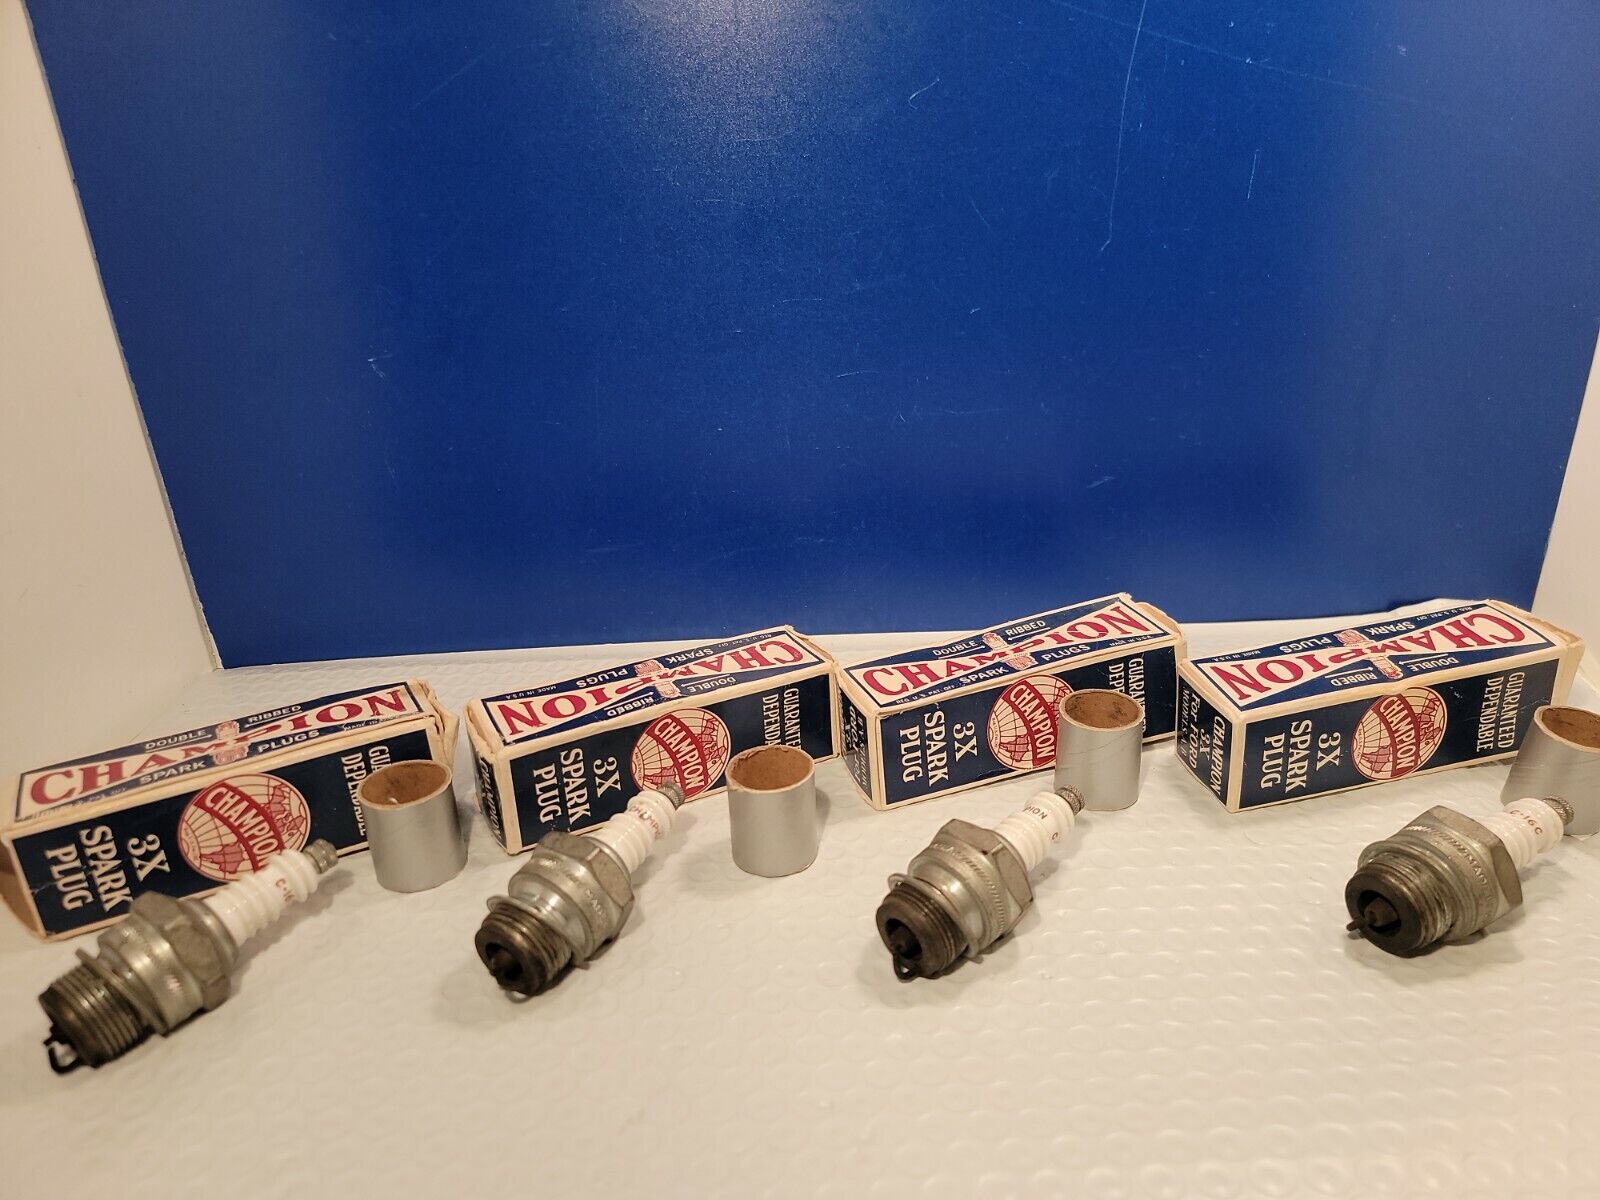 4-Vtg Champion C-16C Spark Plugs Used In 3 X Spark Plug Boxes , Ford Model A\'s 